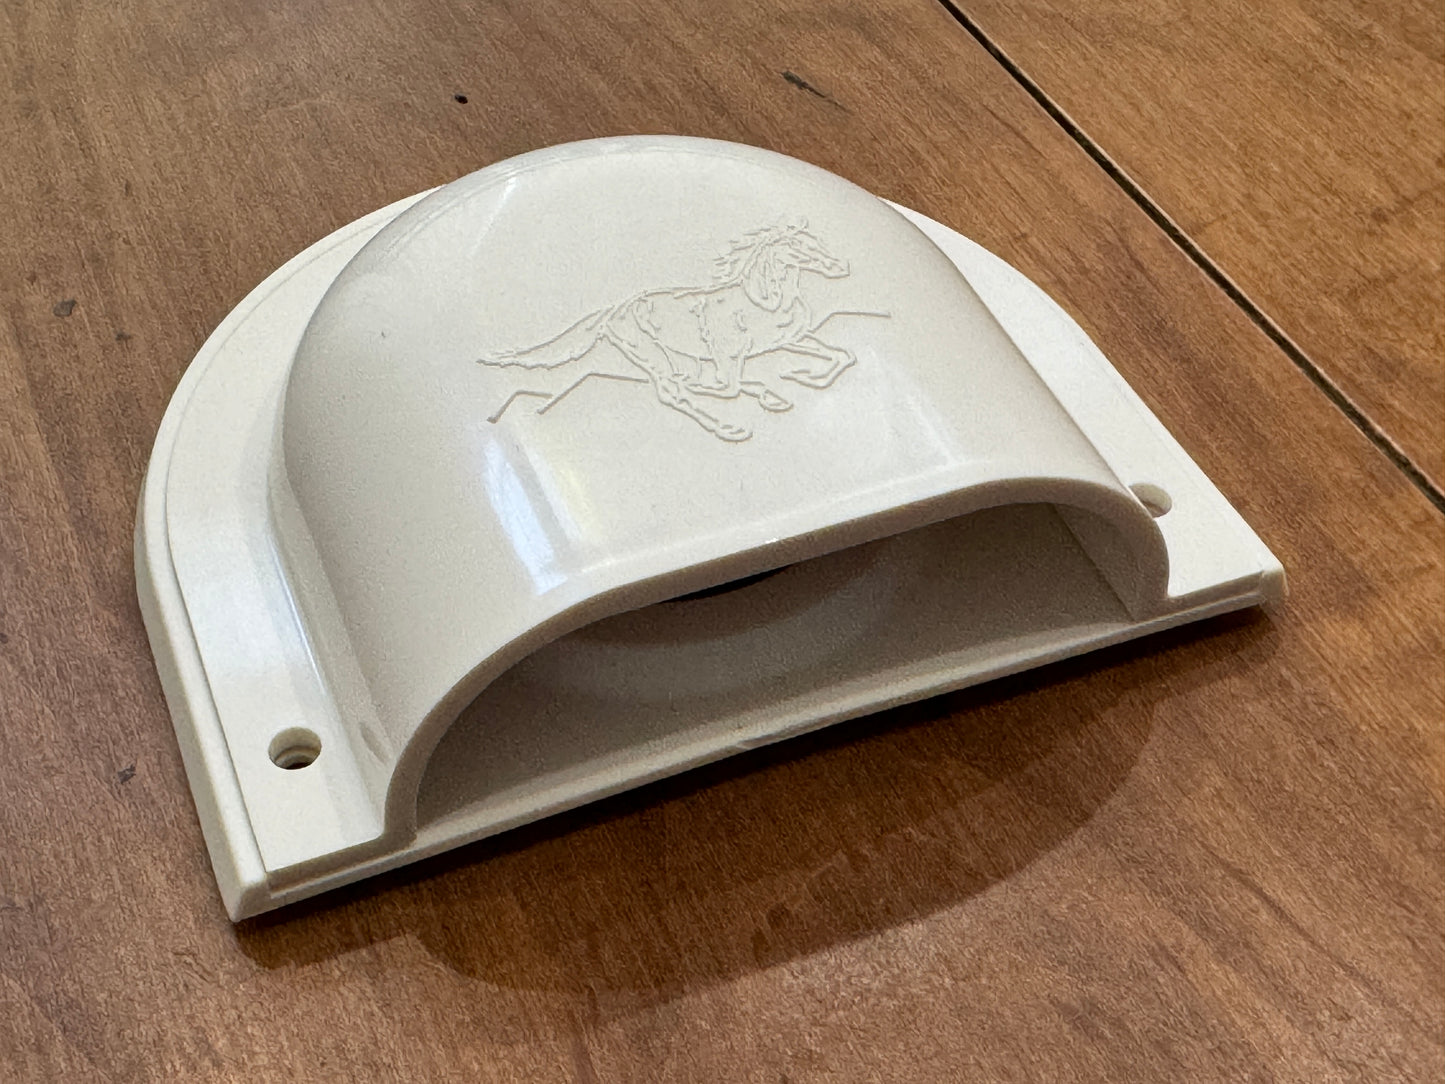 Westfalia Roof Air Vent Cover and Seal.